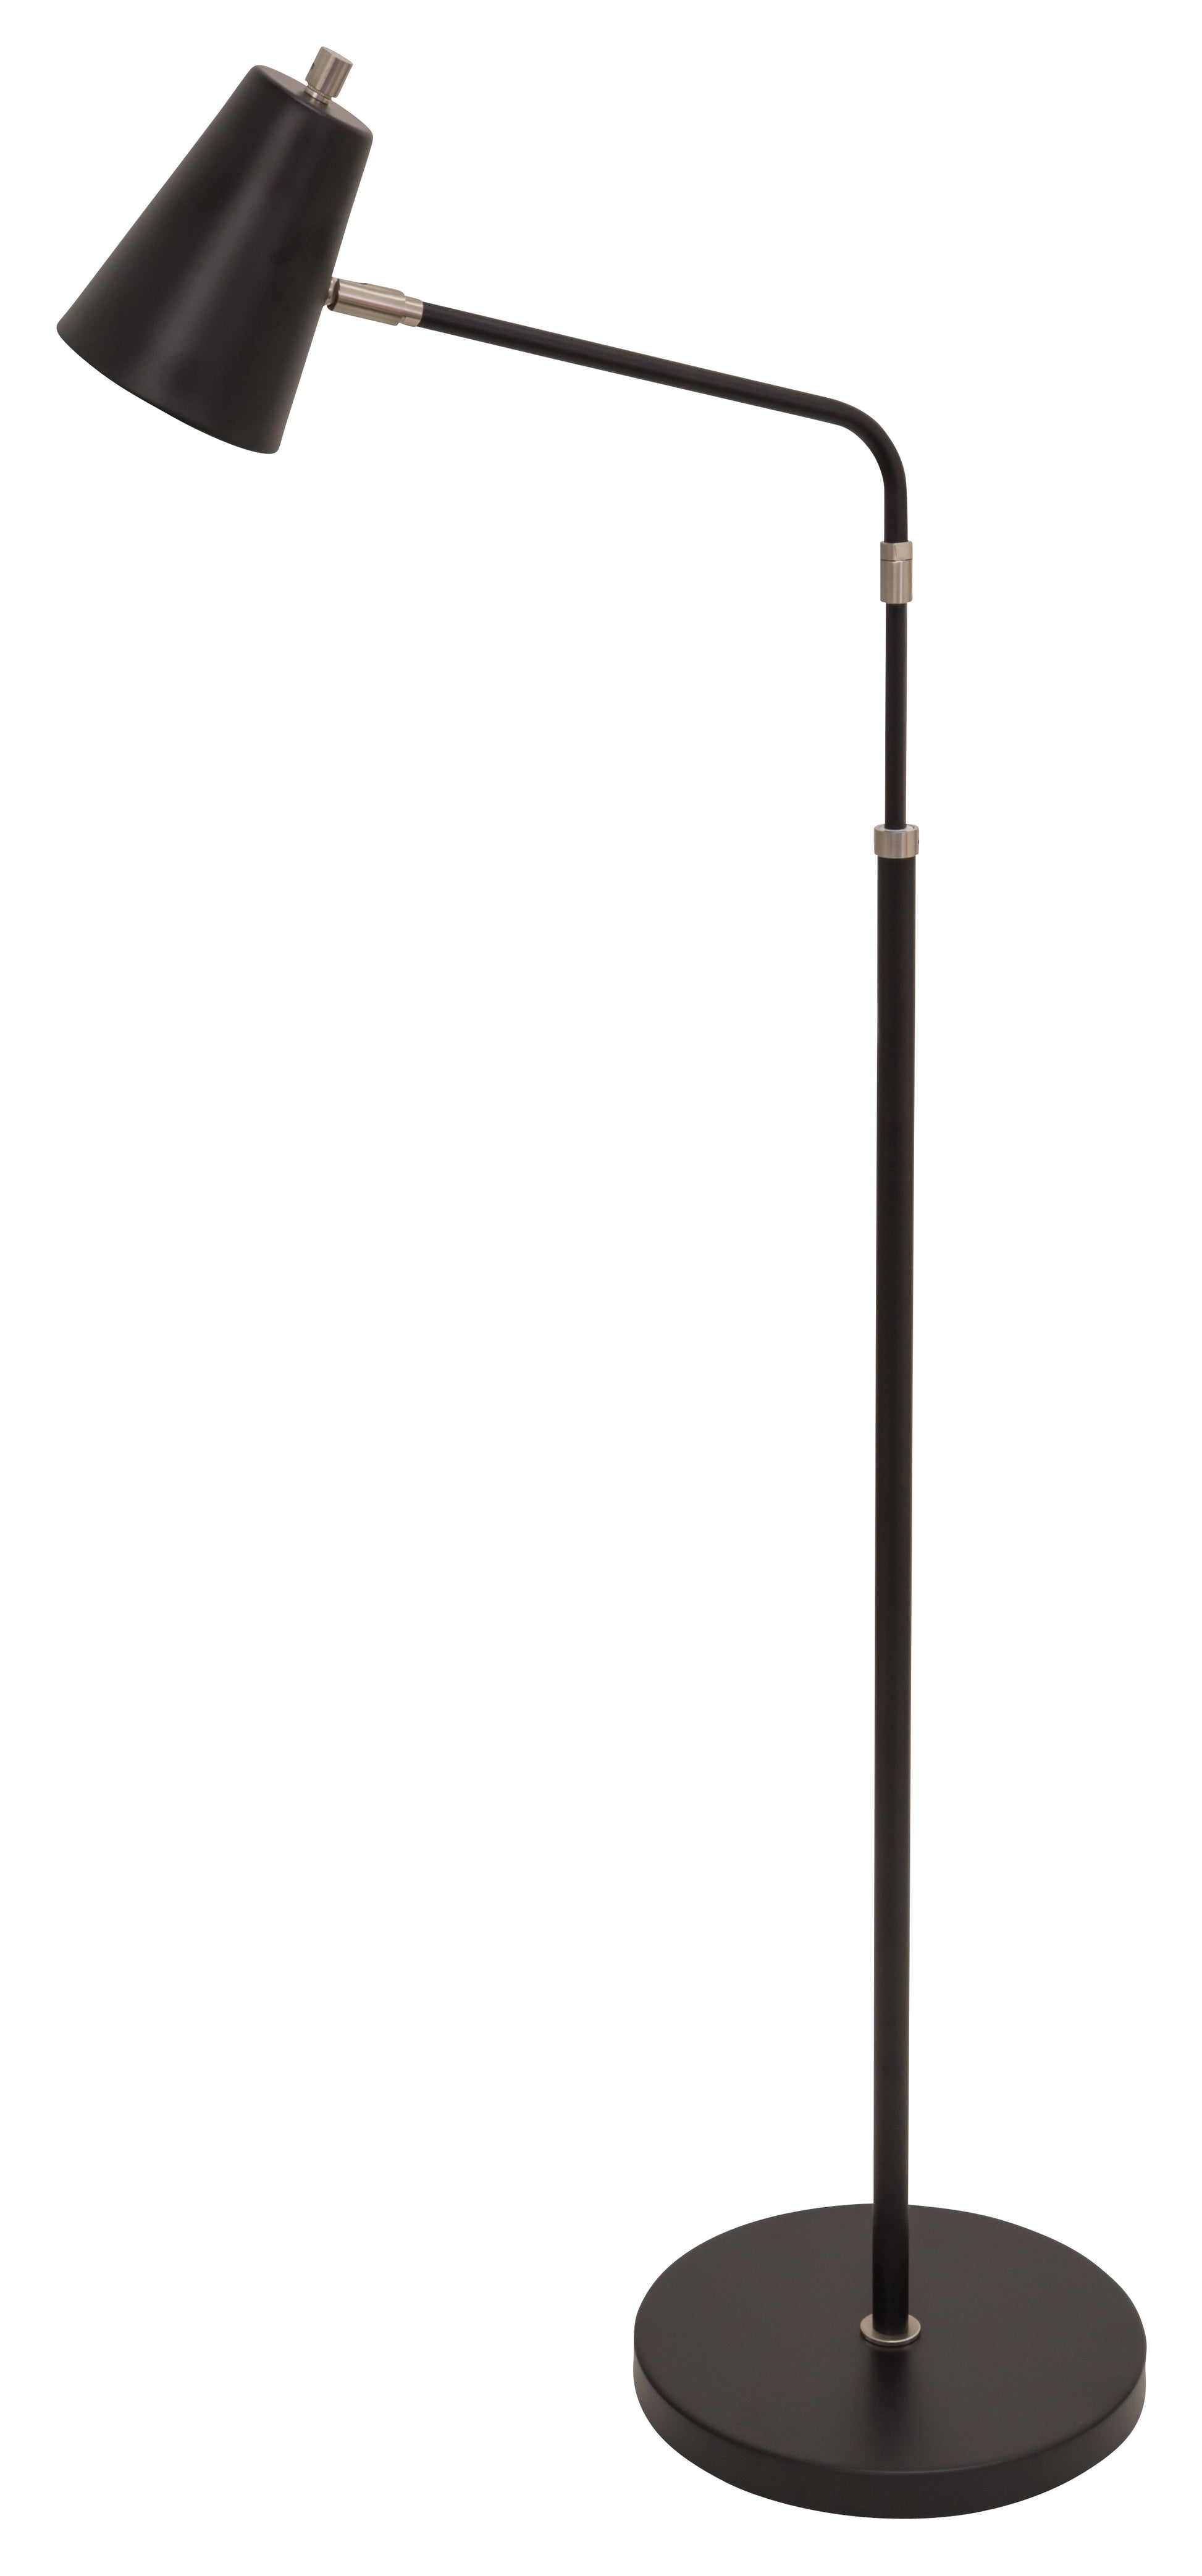 House of Troy Kirby LED Adjustable Floor Lamp Black Satin Nickel Accents K100-BLK